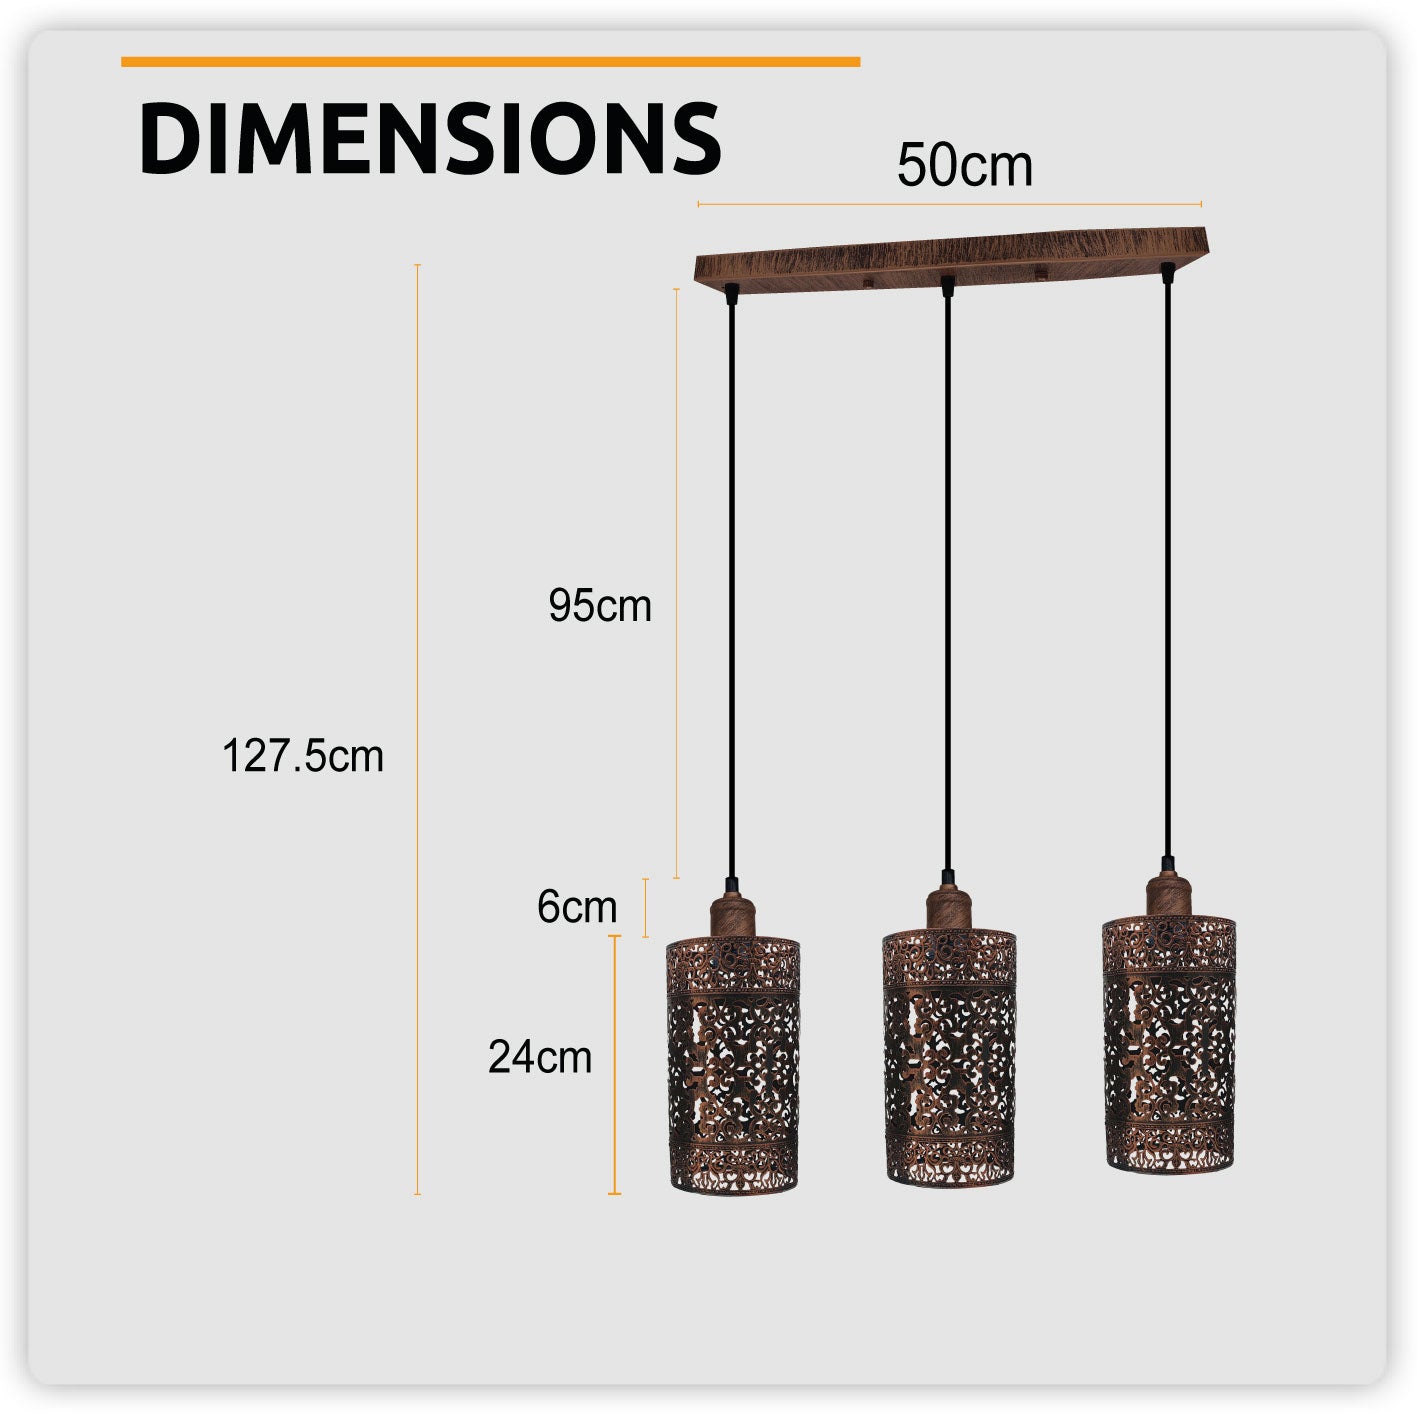 Industrial Retro pendant light 3 way Rectangle ceiling base brushed finished Metal Ceiling Lamp Shade Pendant E27 lamp base for Home Living room Office Kitchen Restaurant